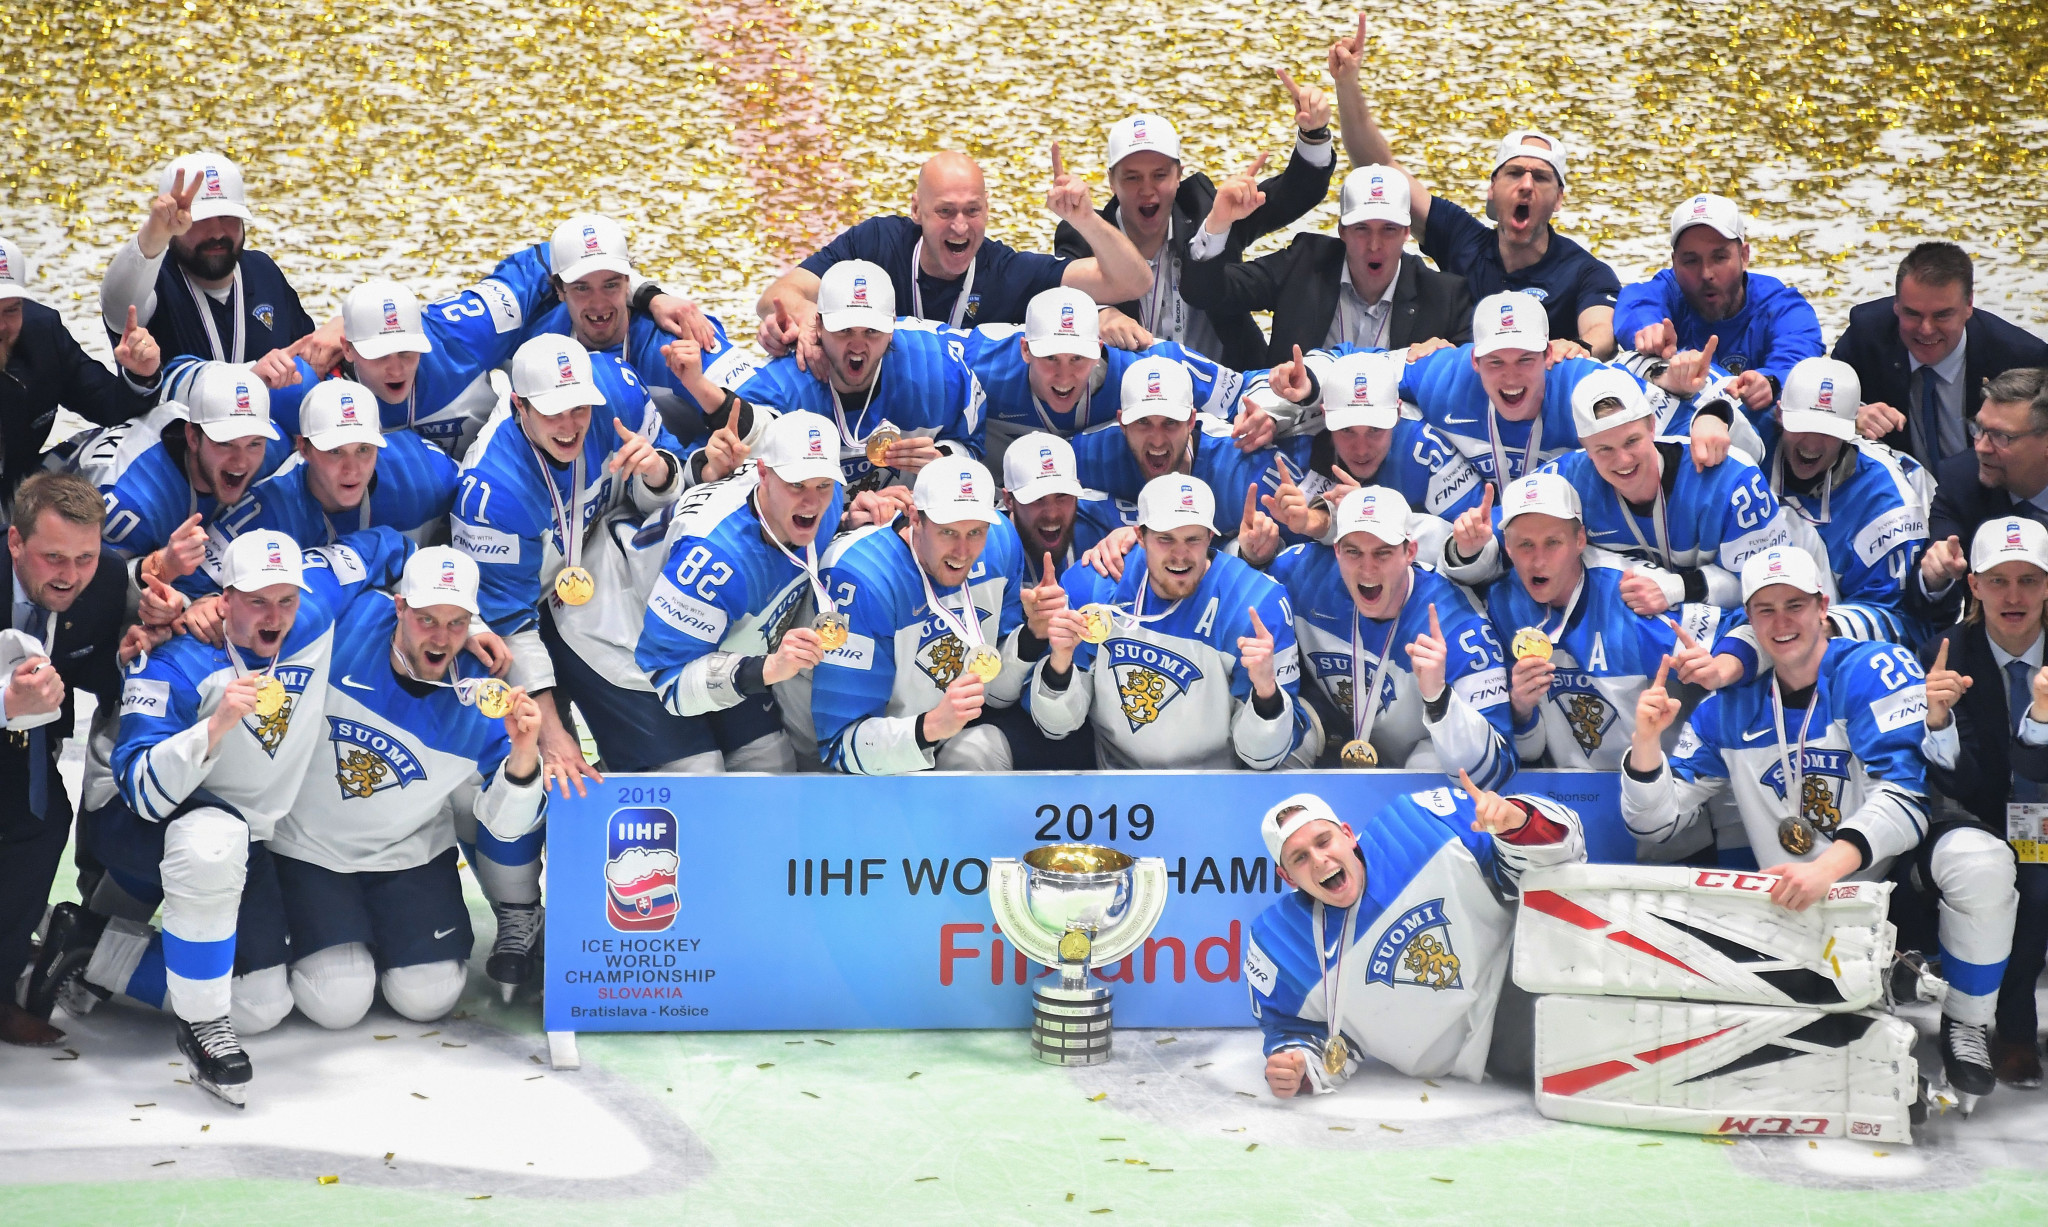 Finland triumphed in the final of the IIHF World Championship ©Getty Images